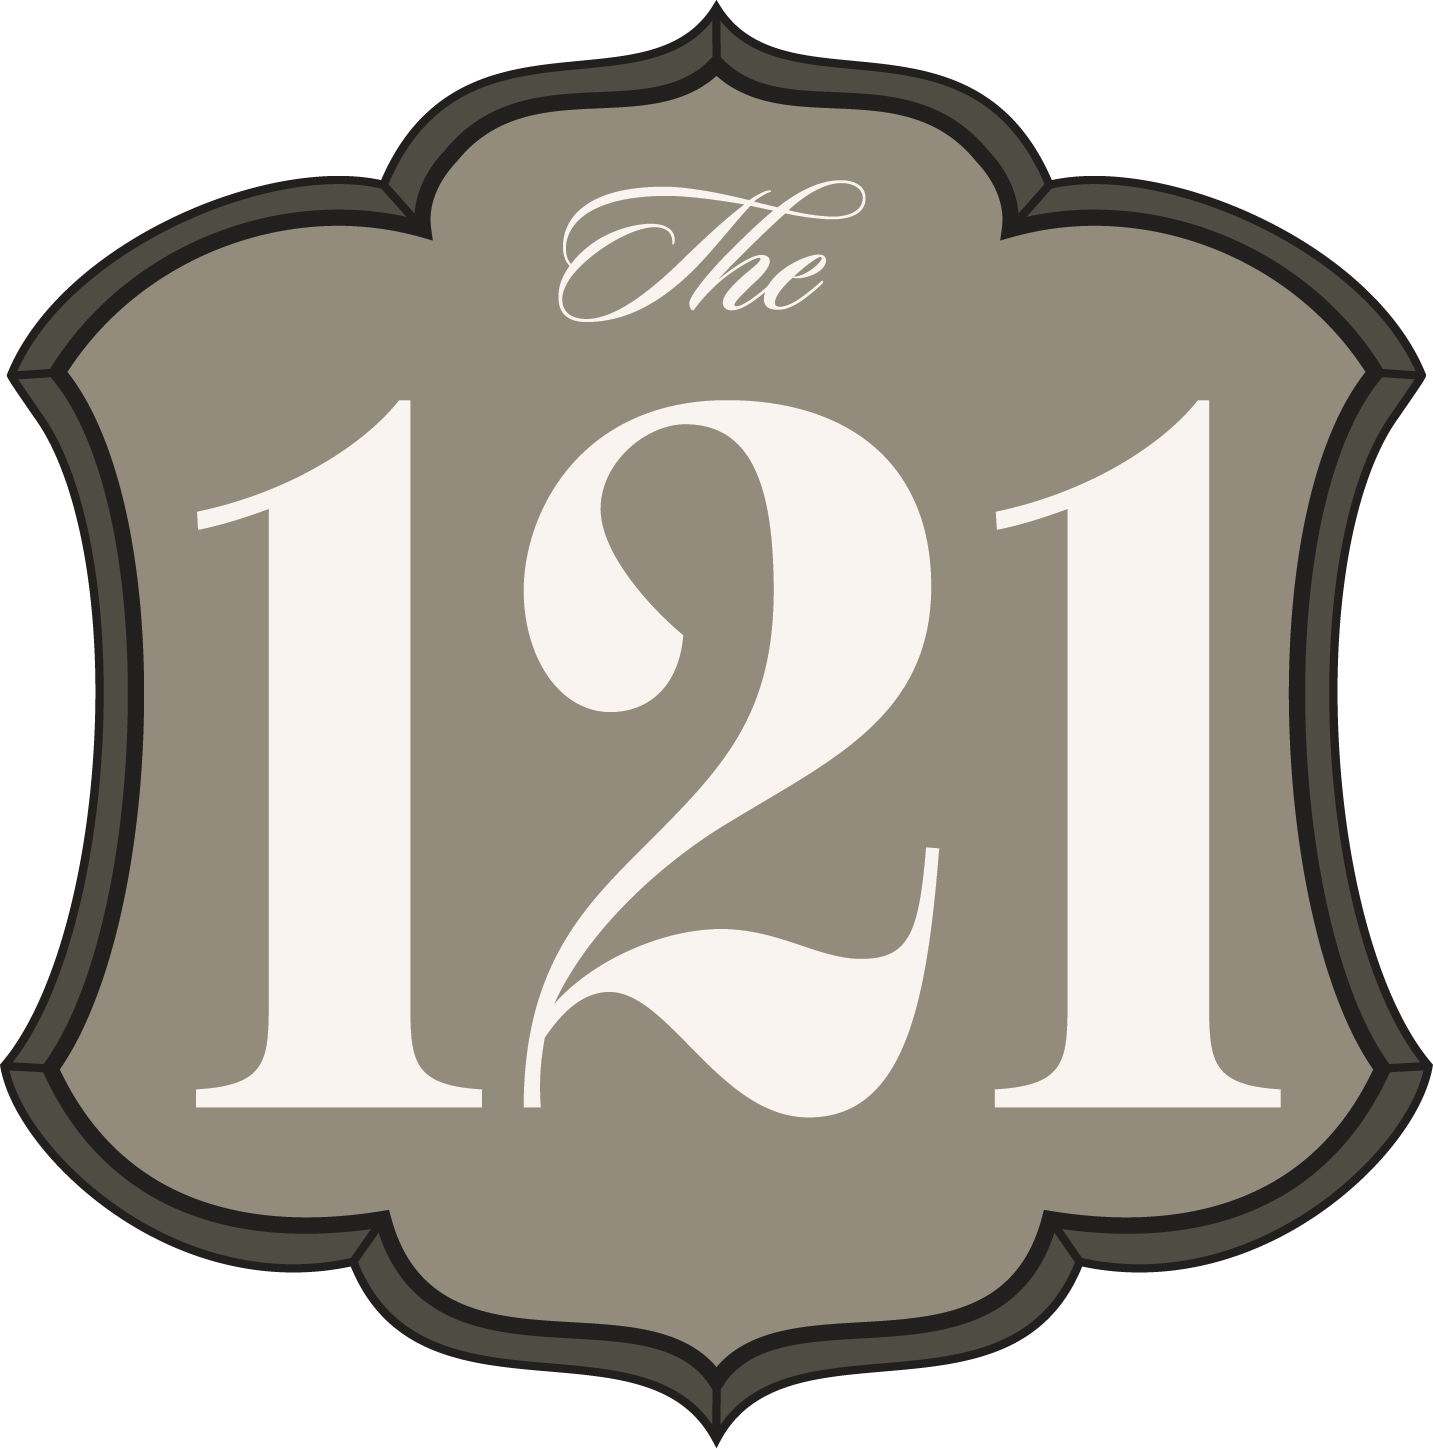 The 121